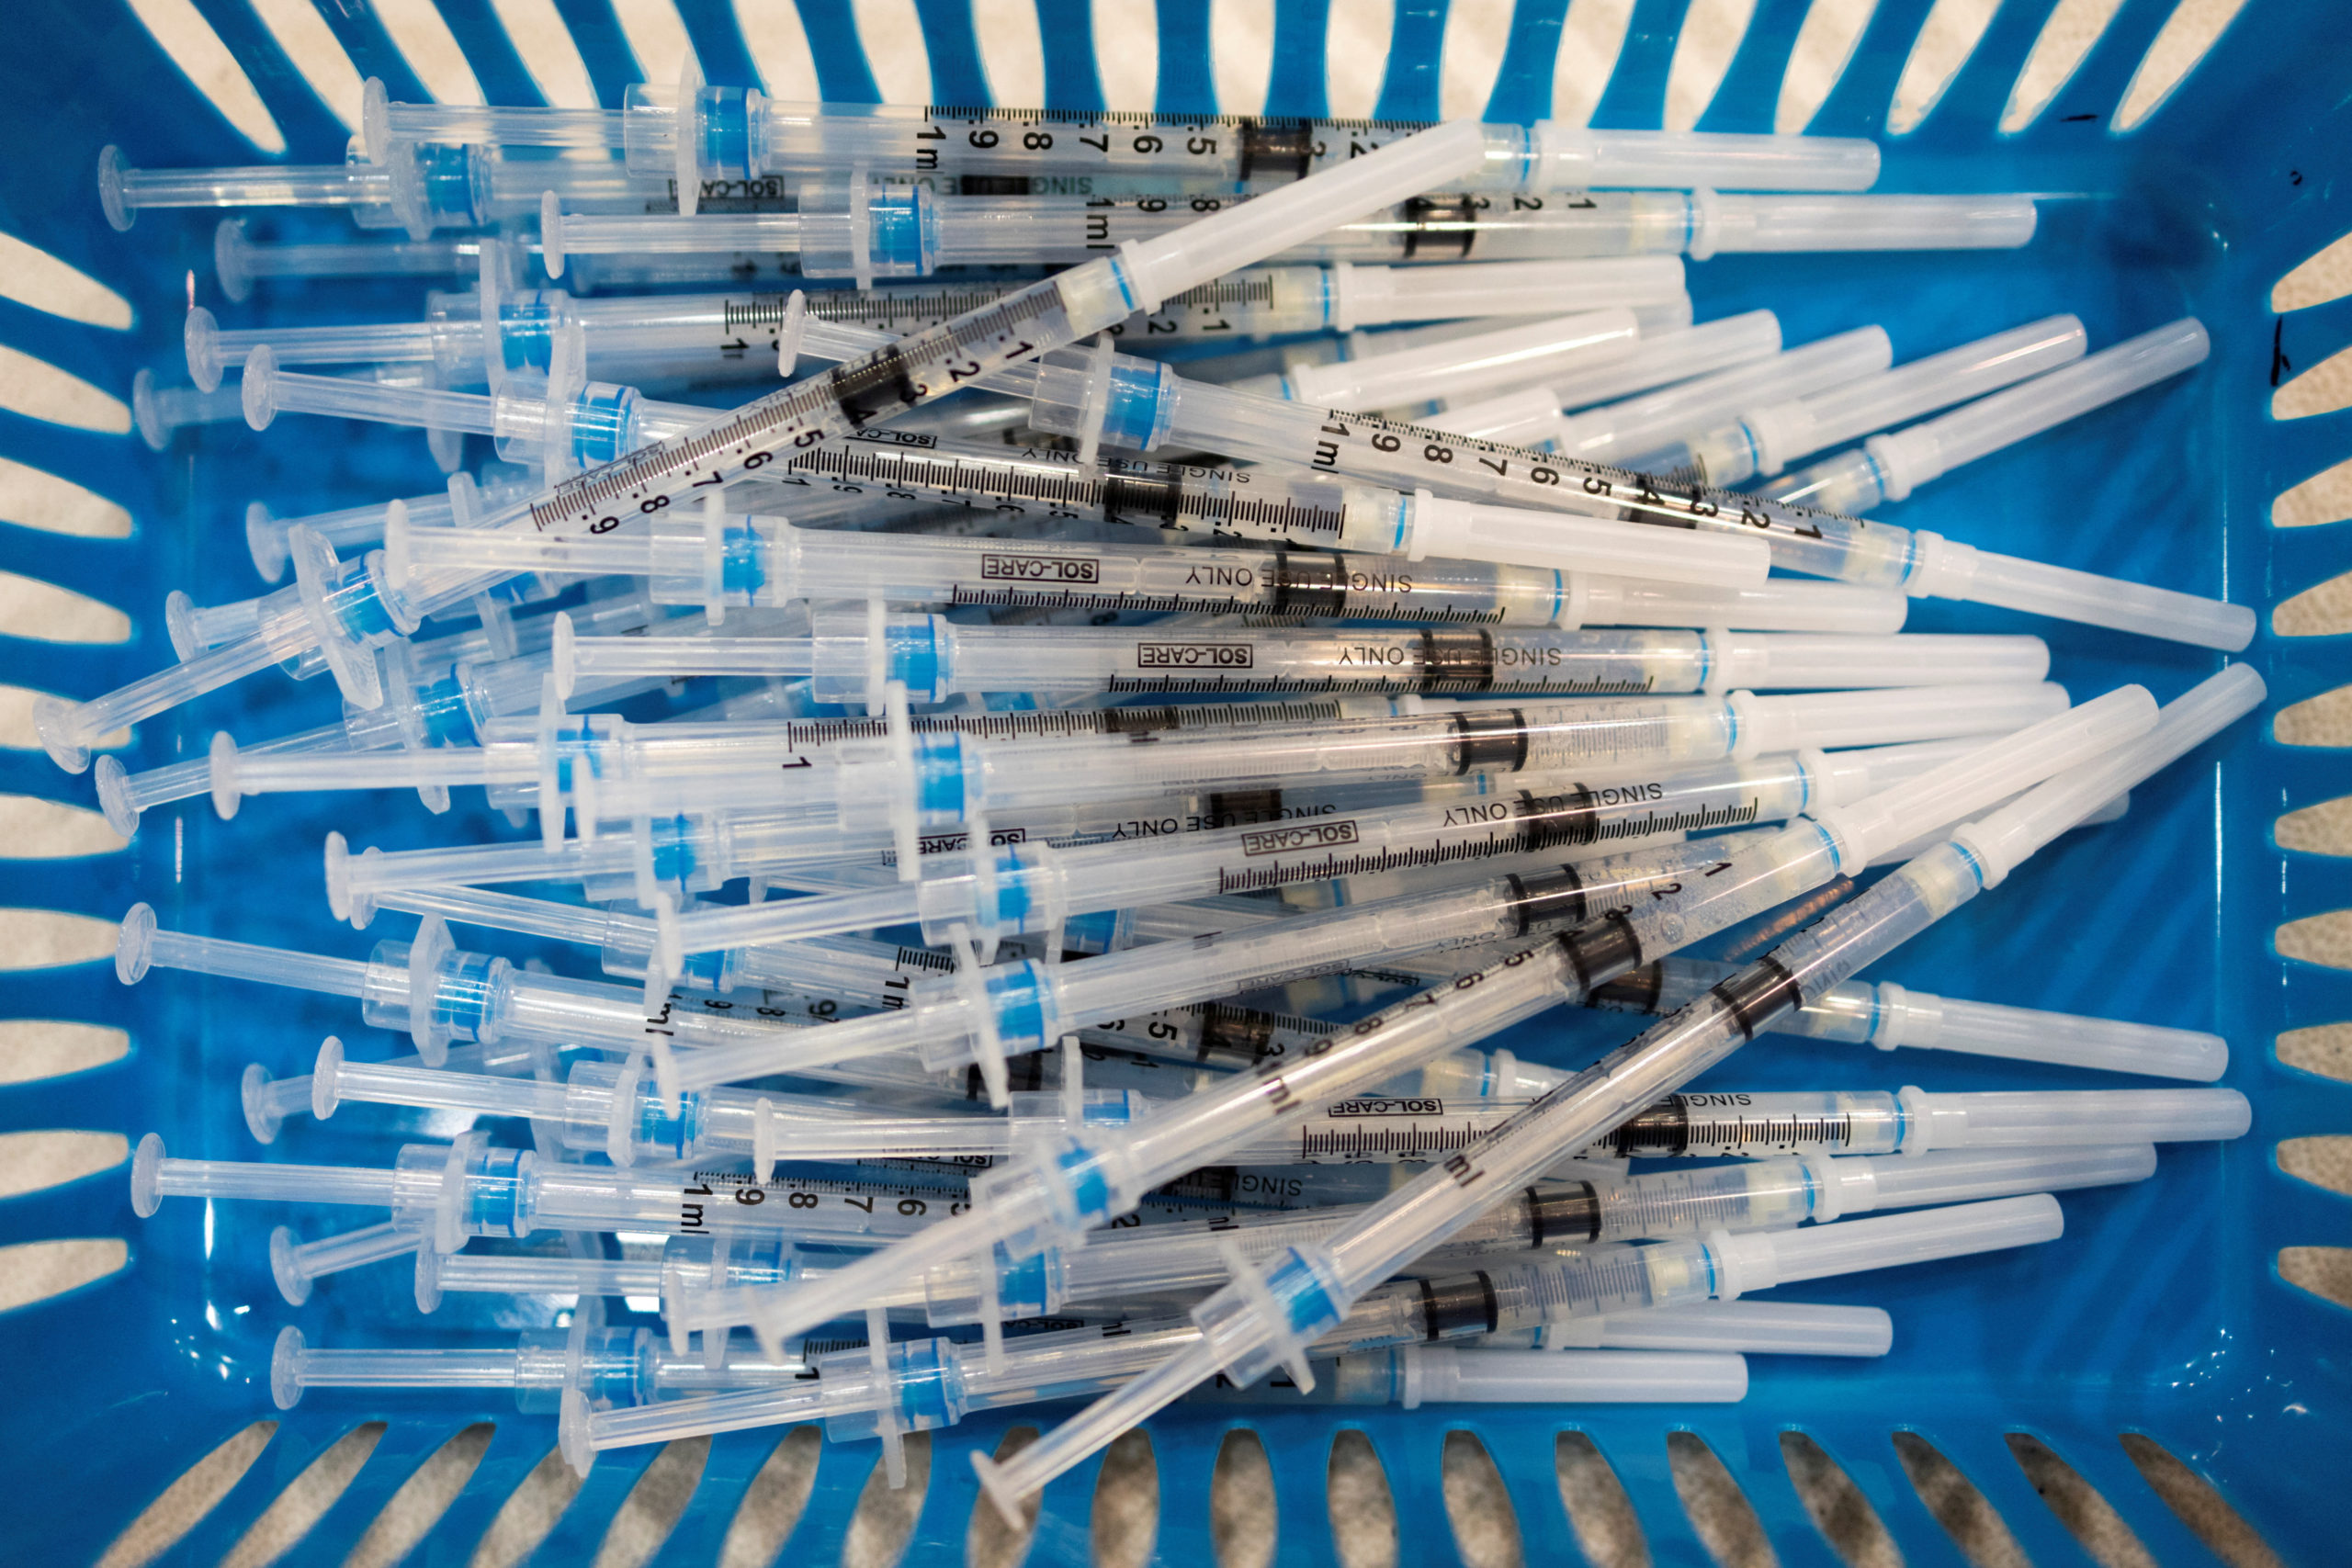 FILE PHOTO: Doses of the Pfizer-BioNTech vaccine against the coronavirus disease (COVID-19) are pictured at a booster clinic for 12 to 17-year-olds in Lansdale, Pennsylvania, U.S., January 9, 2022. REUTERS/Hannah Beier/File Photo